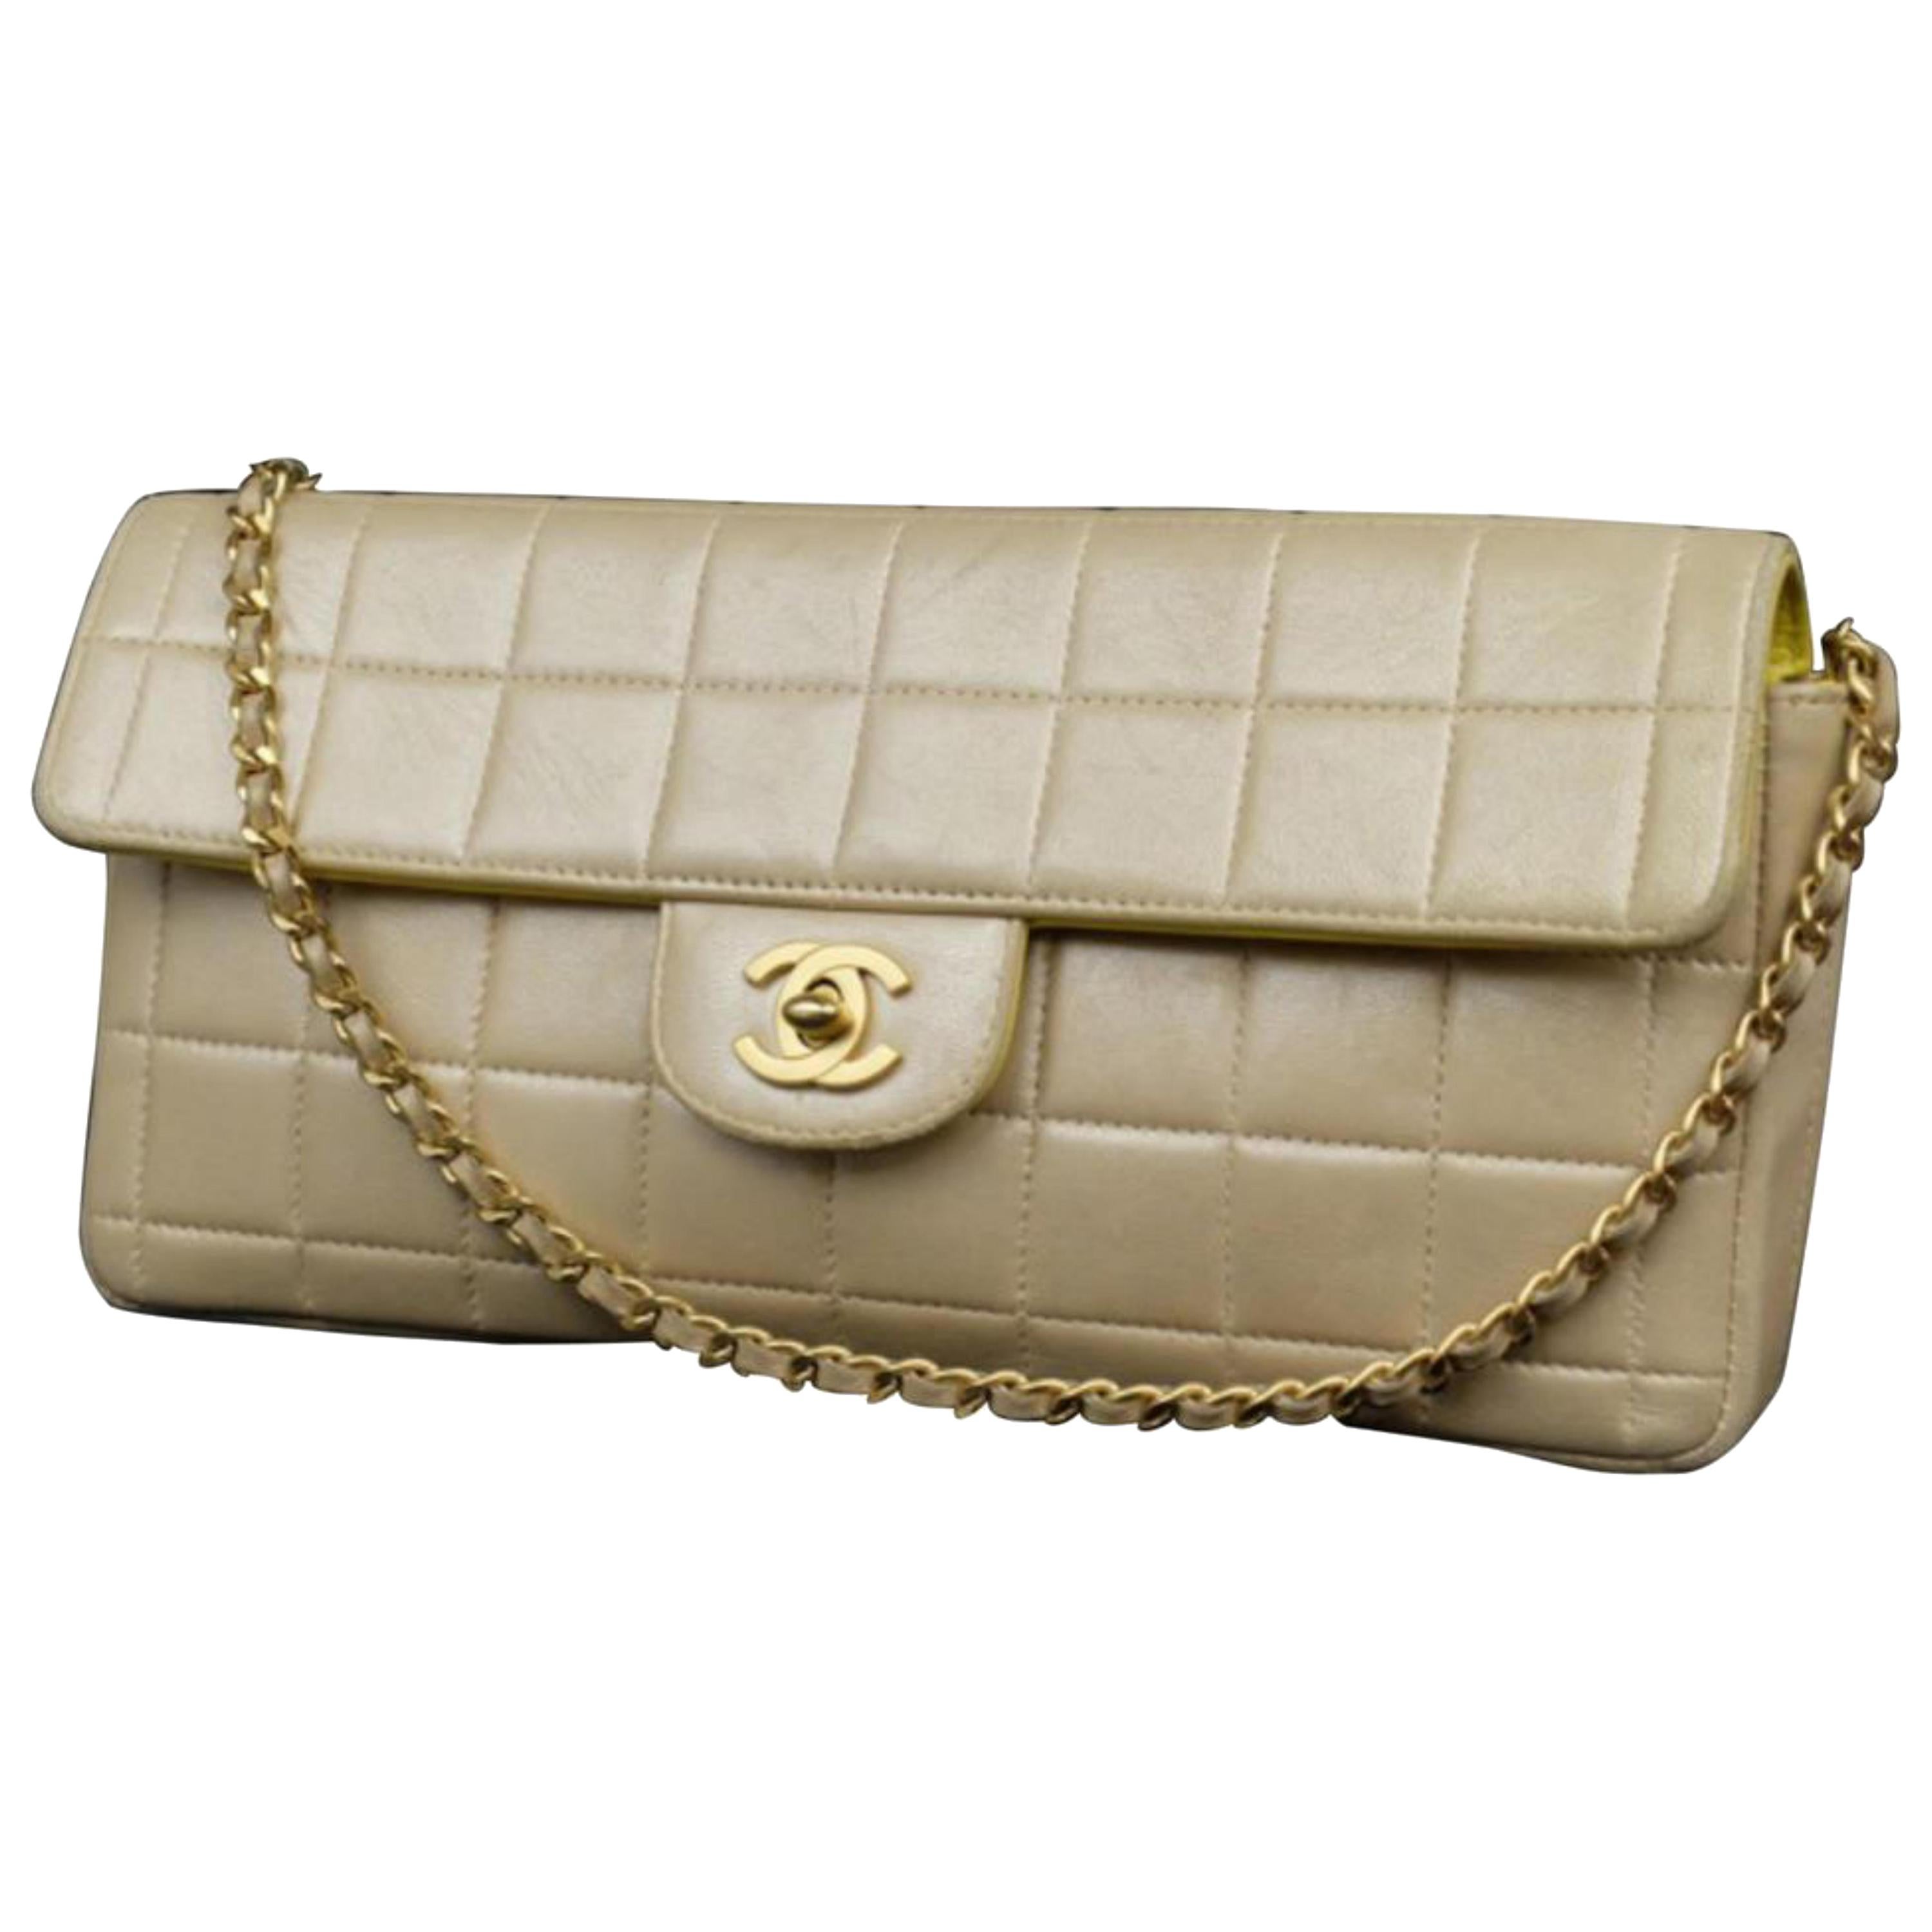 Chanel Classic Flap East West Pearlized 226022 Iridescent Beige Shoulder Bag For Sale